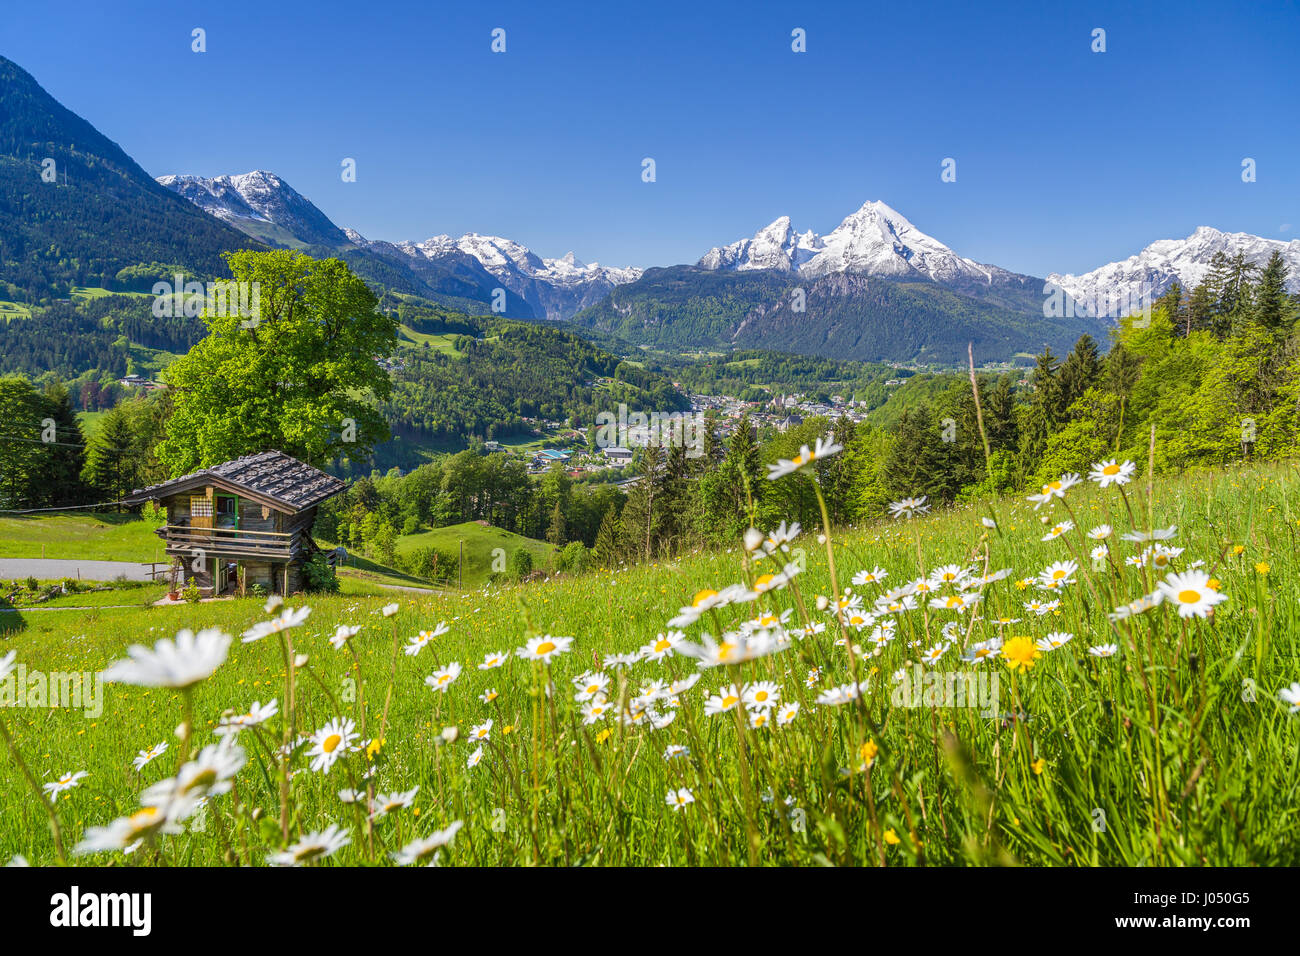 Idyllic mountain scenery in the Alps with traditional old mountain chalet and fresh green meadows in springtime Stock Photo